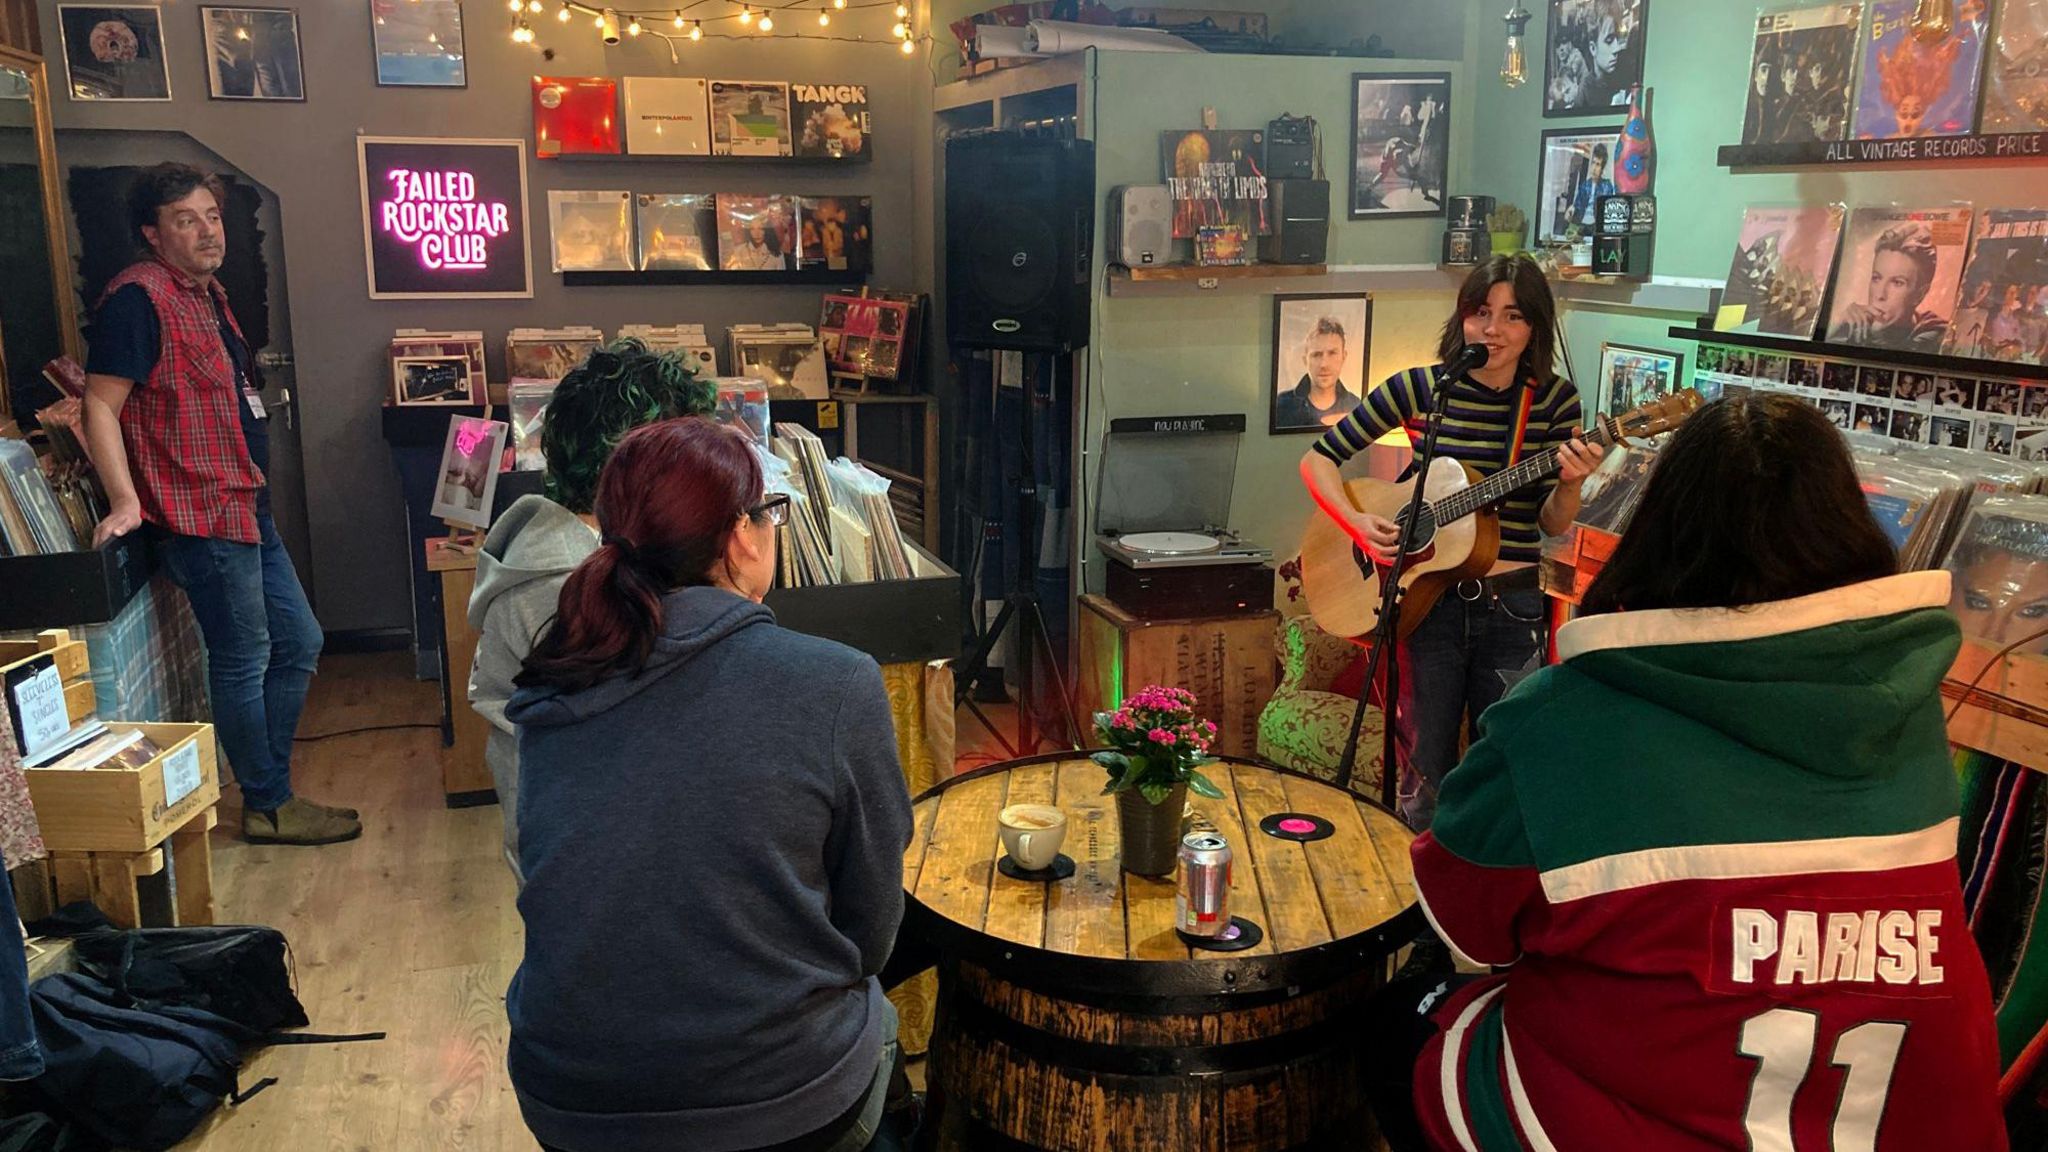 A guitarist is sitting on a stool singing to coffee shop customers